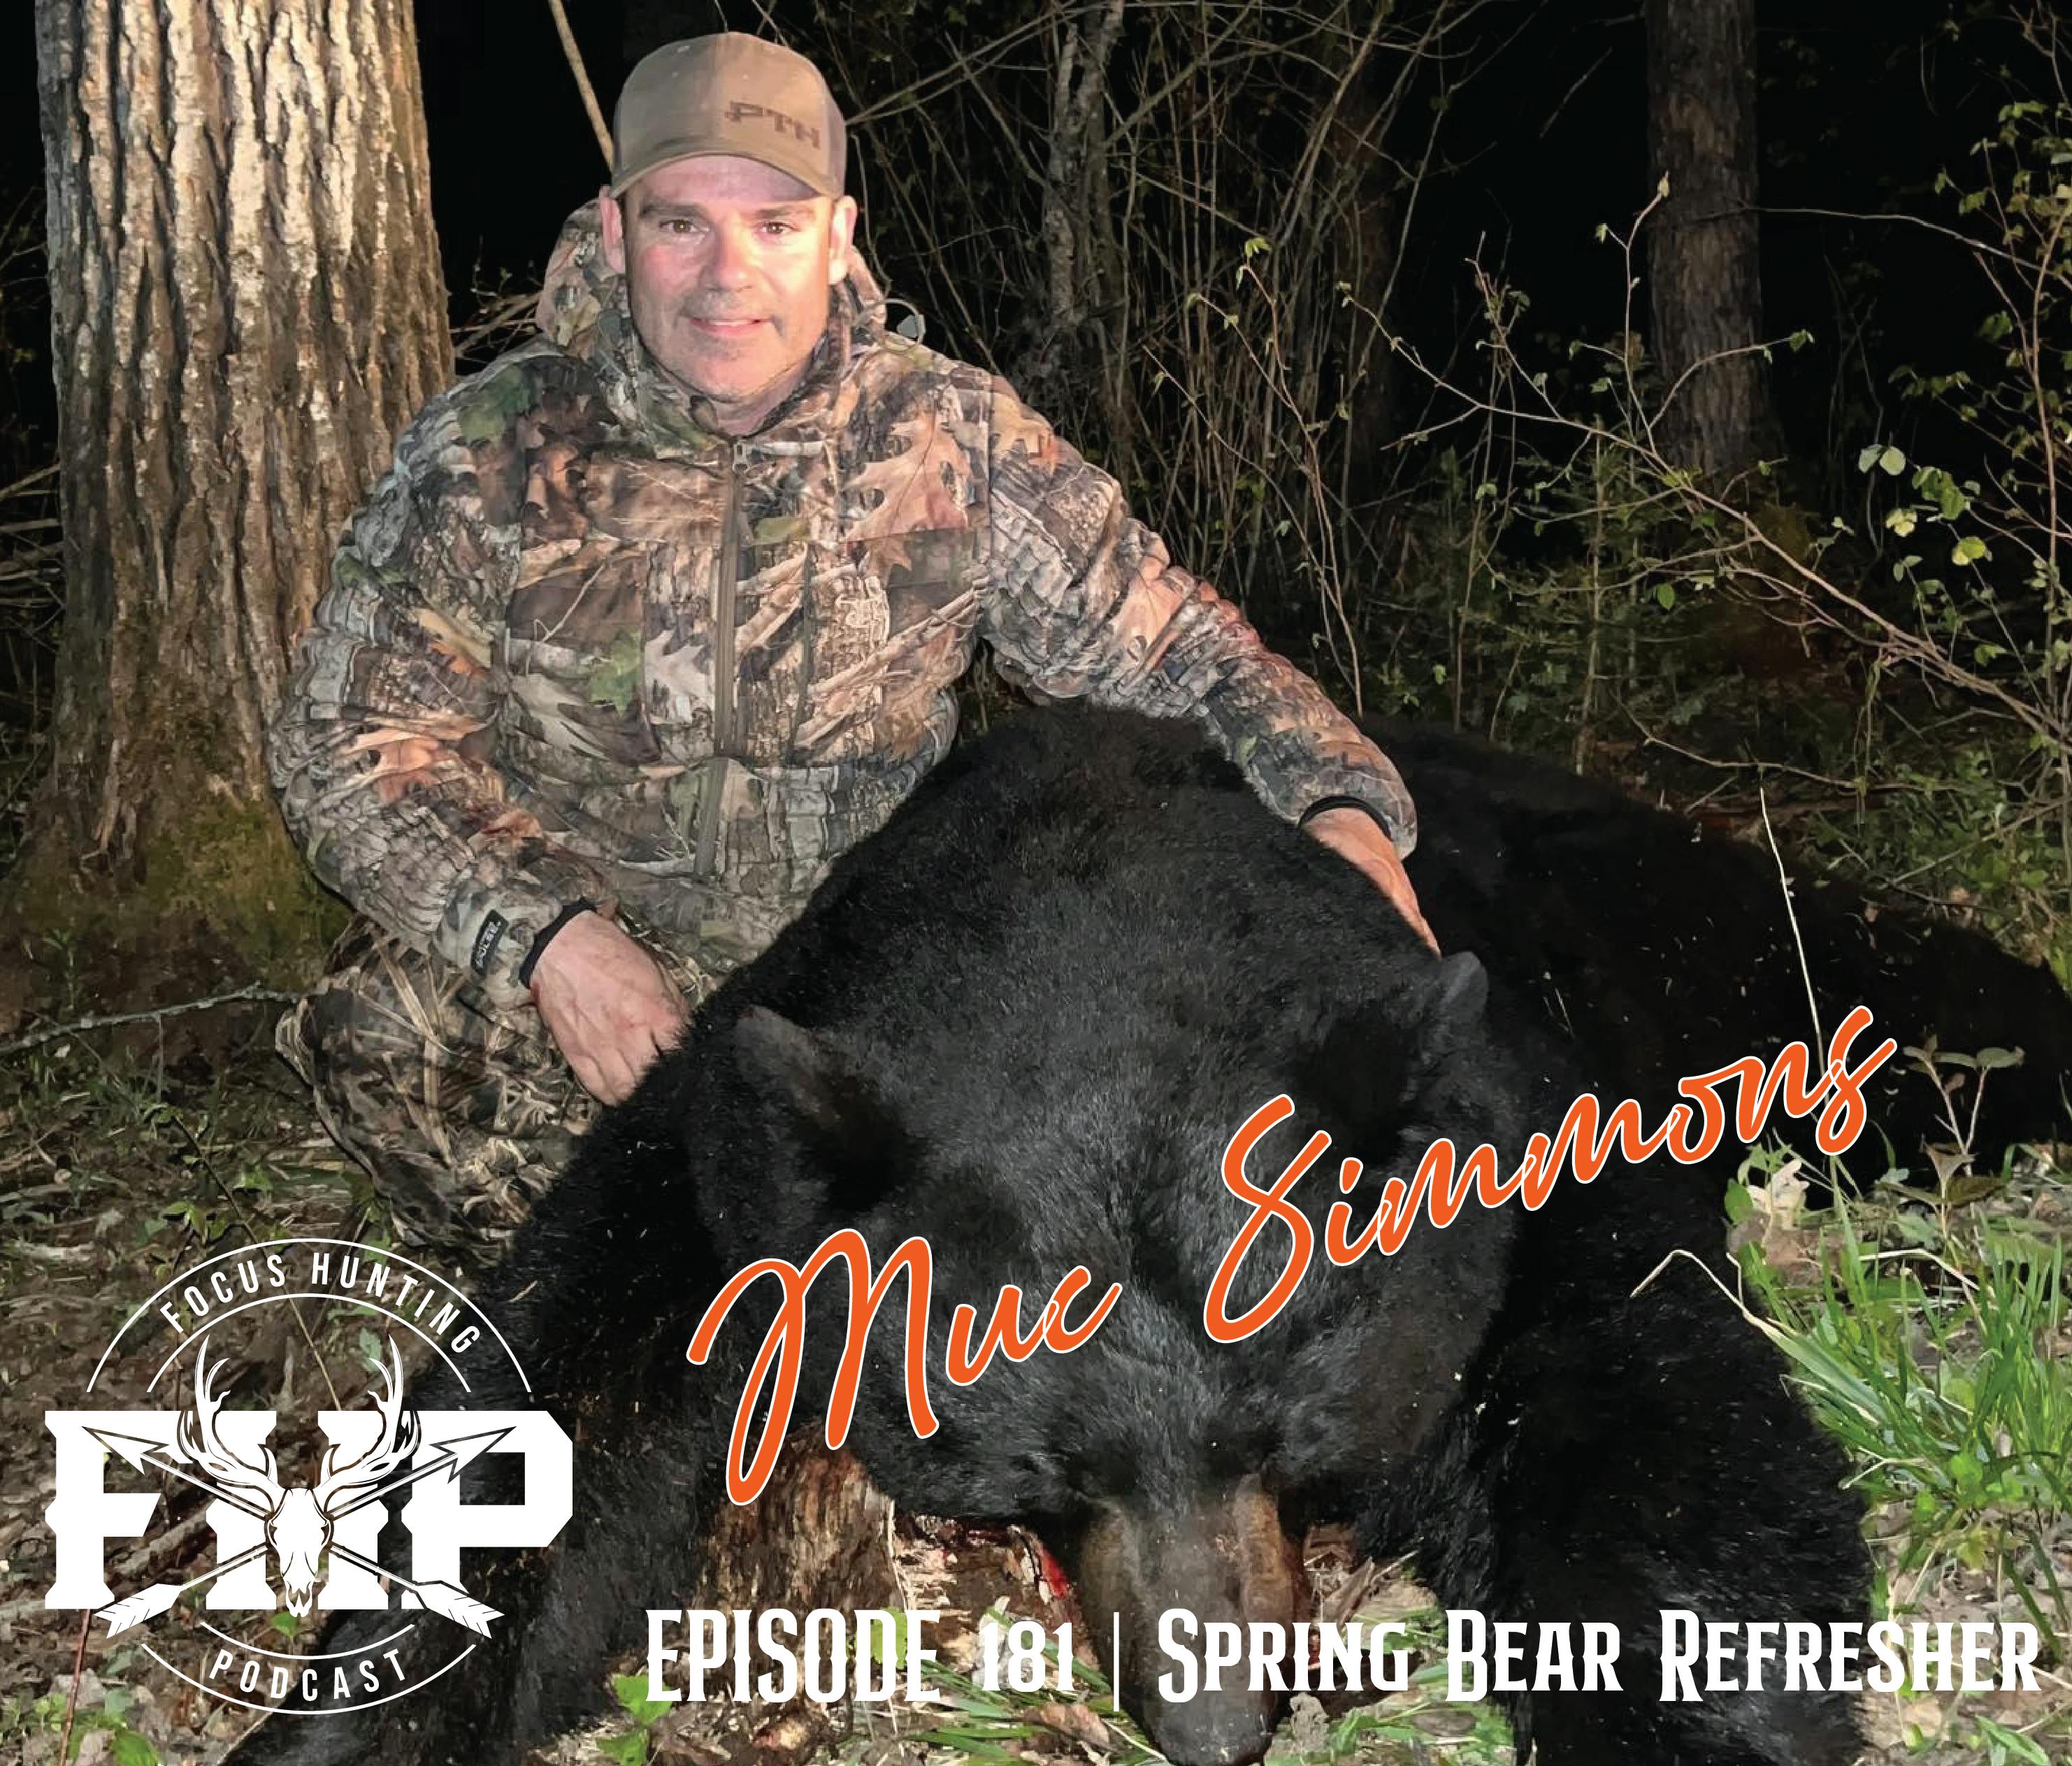 Episode #181 Spring Bear Refresher with Muc Simmons